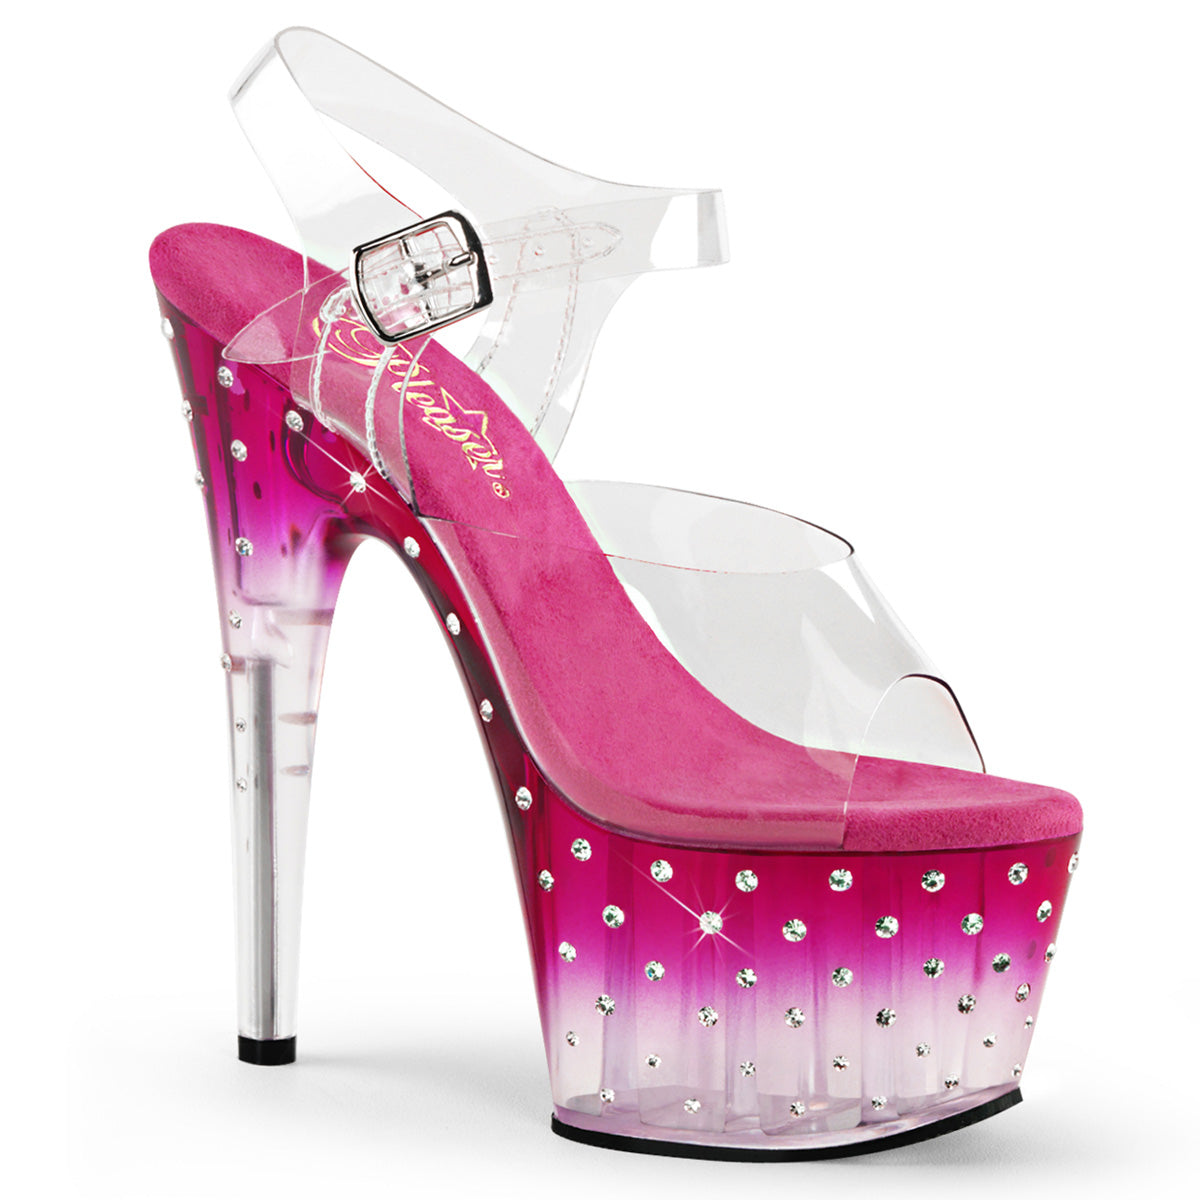 STARDUST-708T 7" Heel Clear and Pink Pole Dancing Platforms-Pleaser- Sexy Shoes